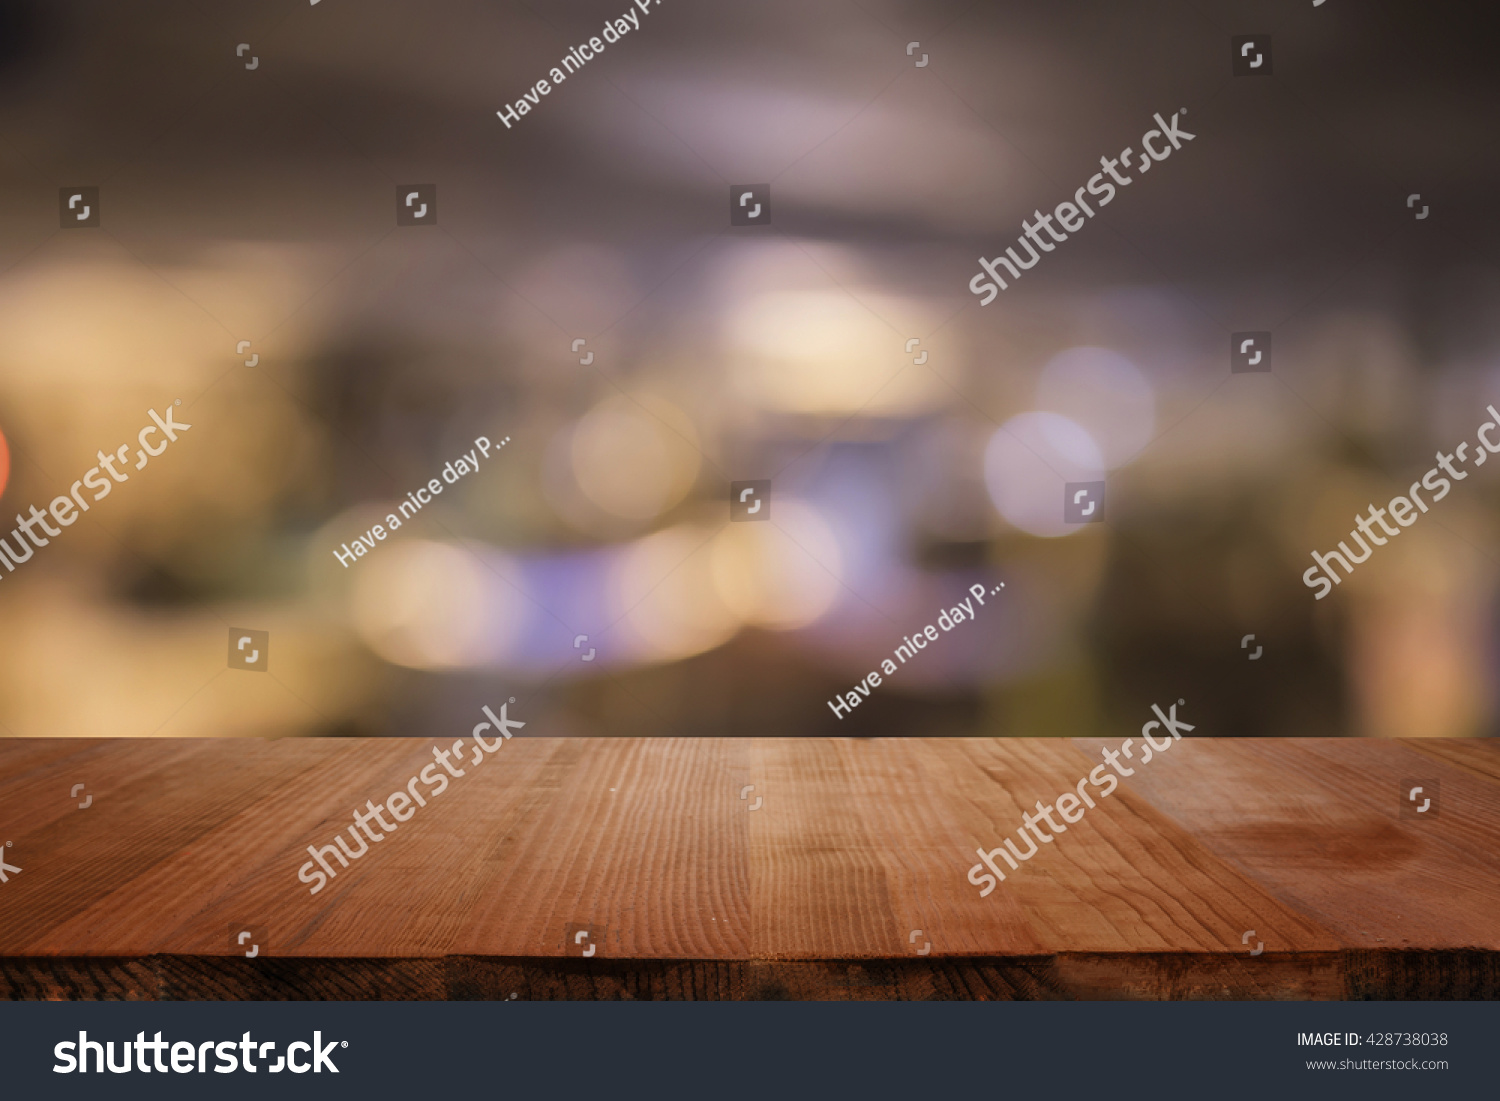  Empty brown wooden table and blur background of abstract  of resturant lights people enjoy eating ,can be used for montage or display your products
  #428738038